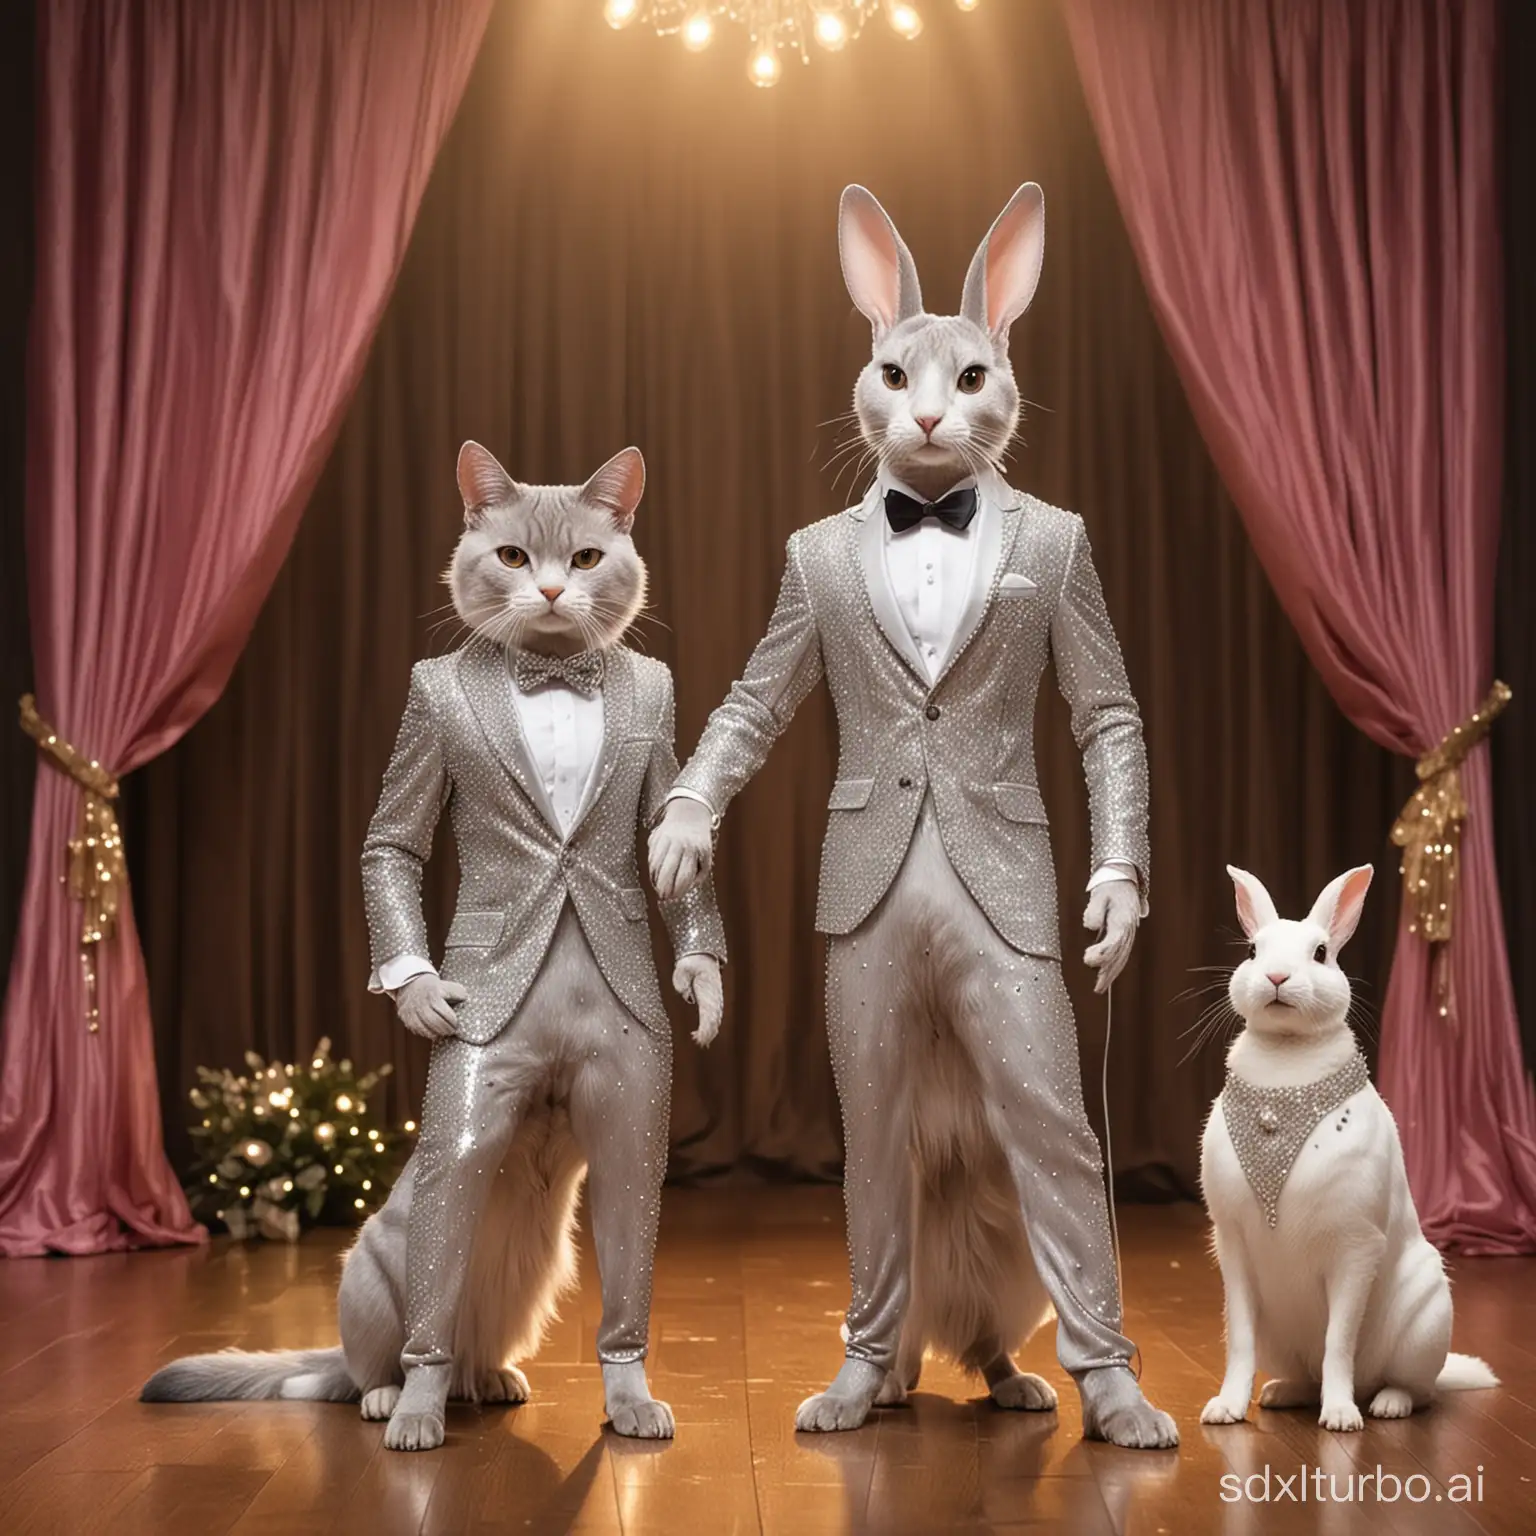 Slim beautiful standing lady cat wearing a bling bling gown, a beautiful lady rabbit standing wearing a bling bling gown, a male standing dog wearing a bling bling suit, they are on a beautiful stage with lots of lights